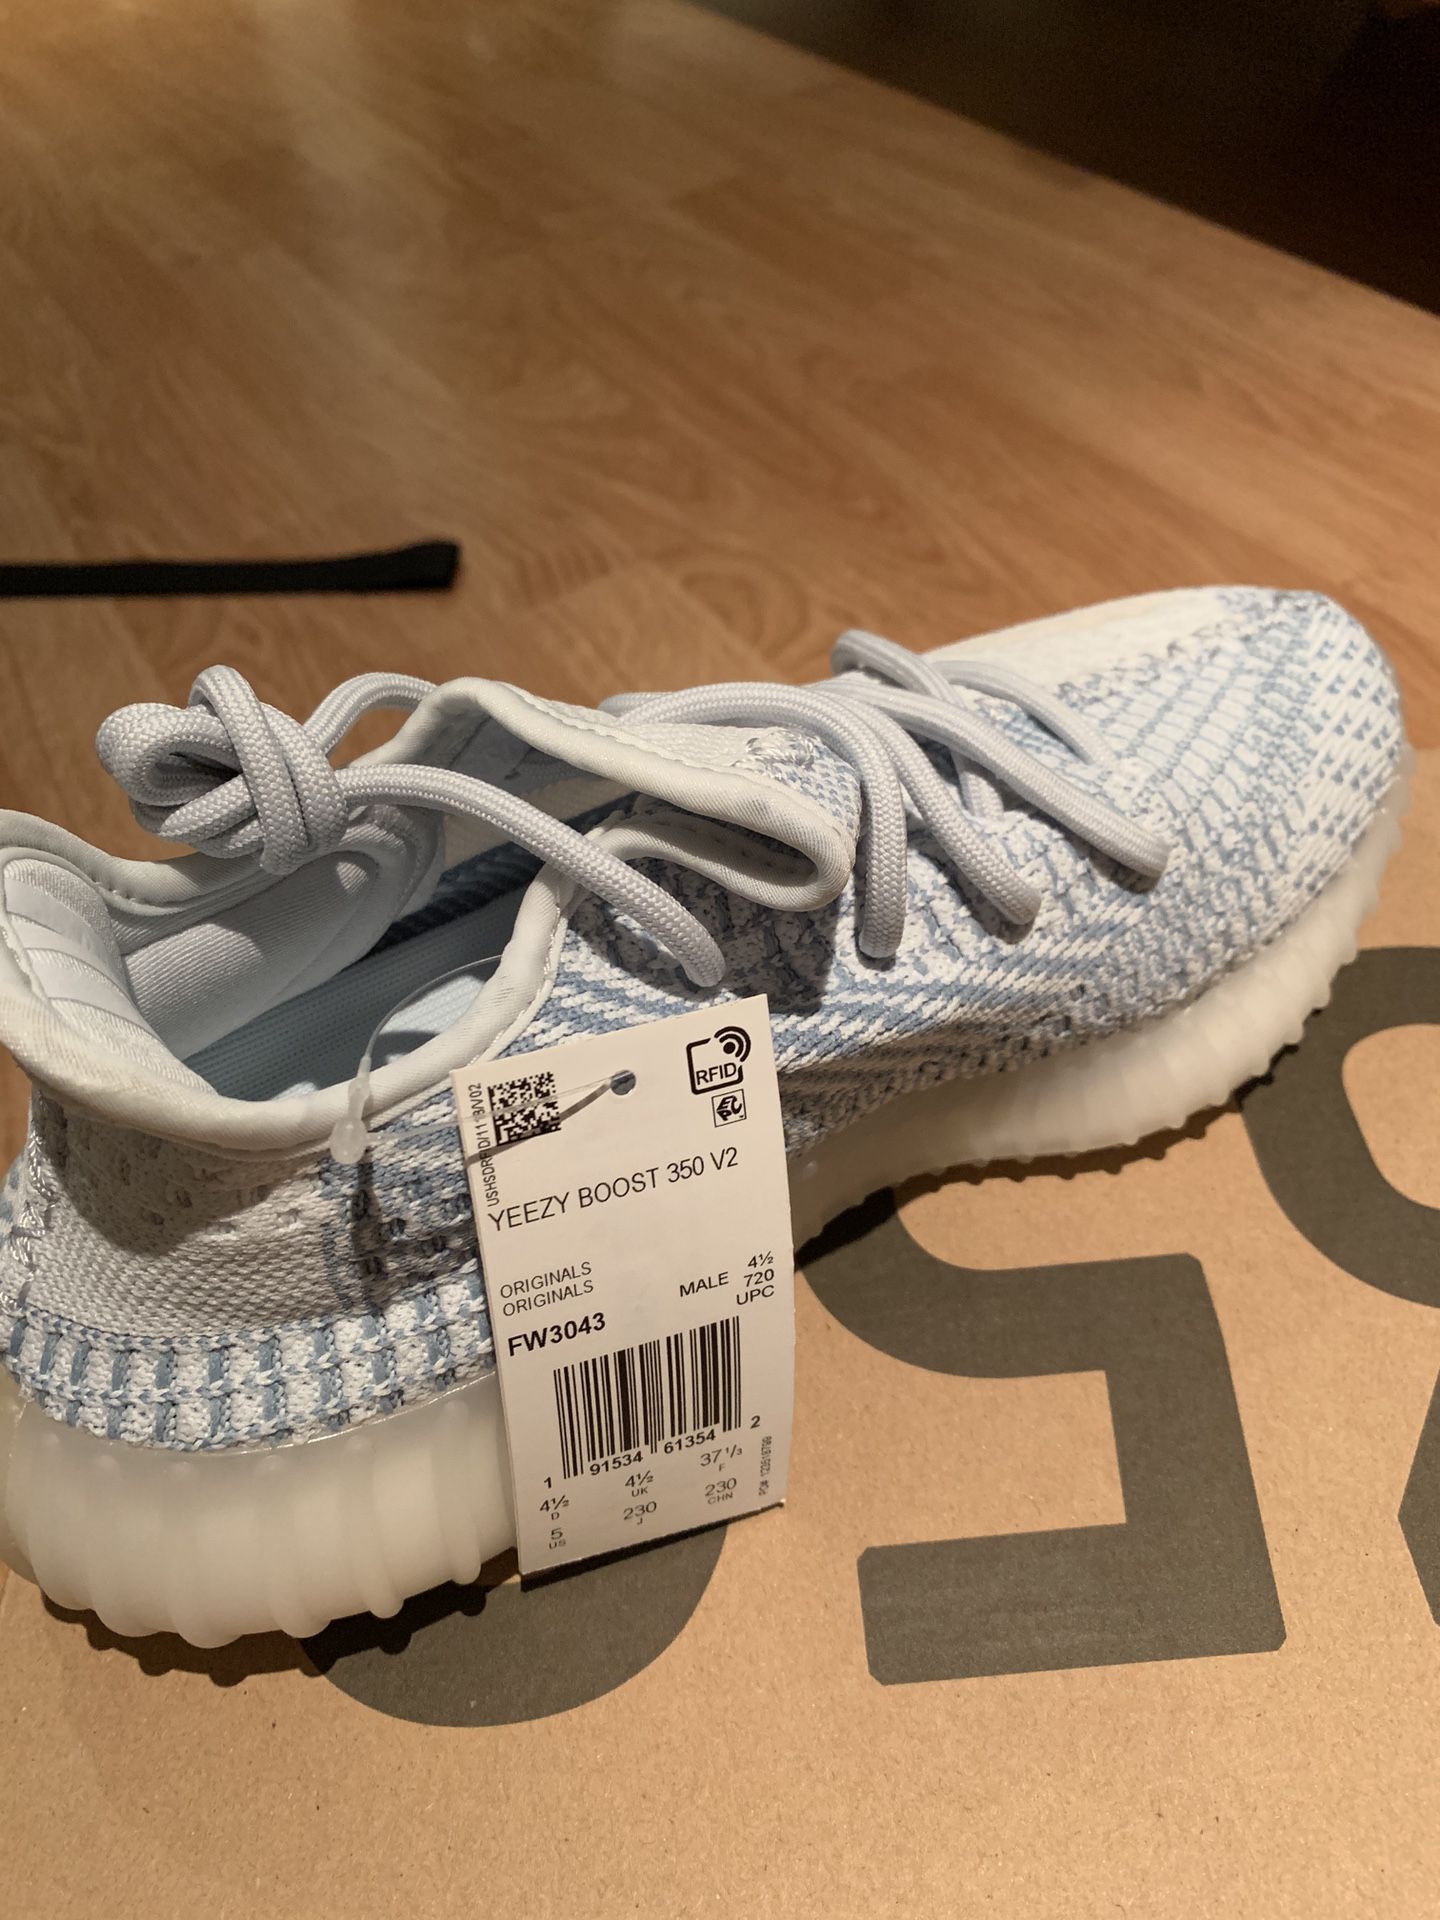 adidas yeezy boost v2 cloud non ref, size 5